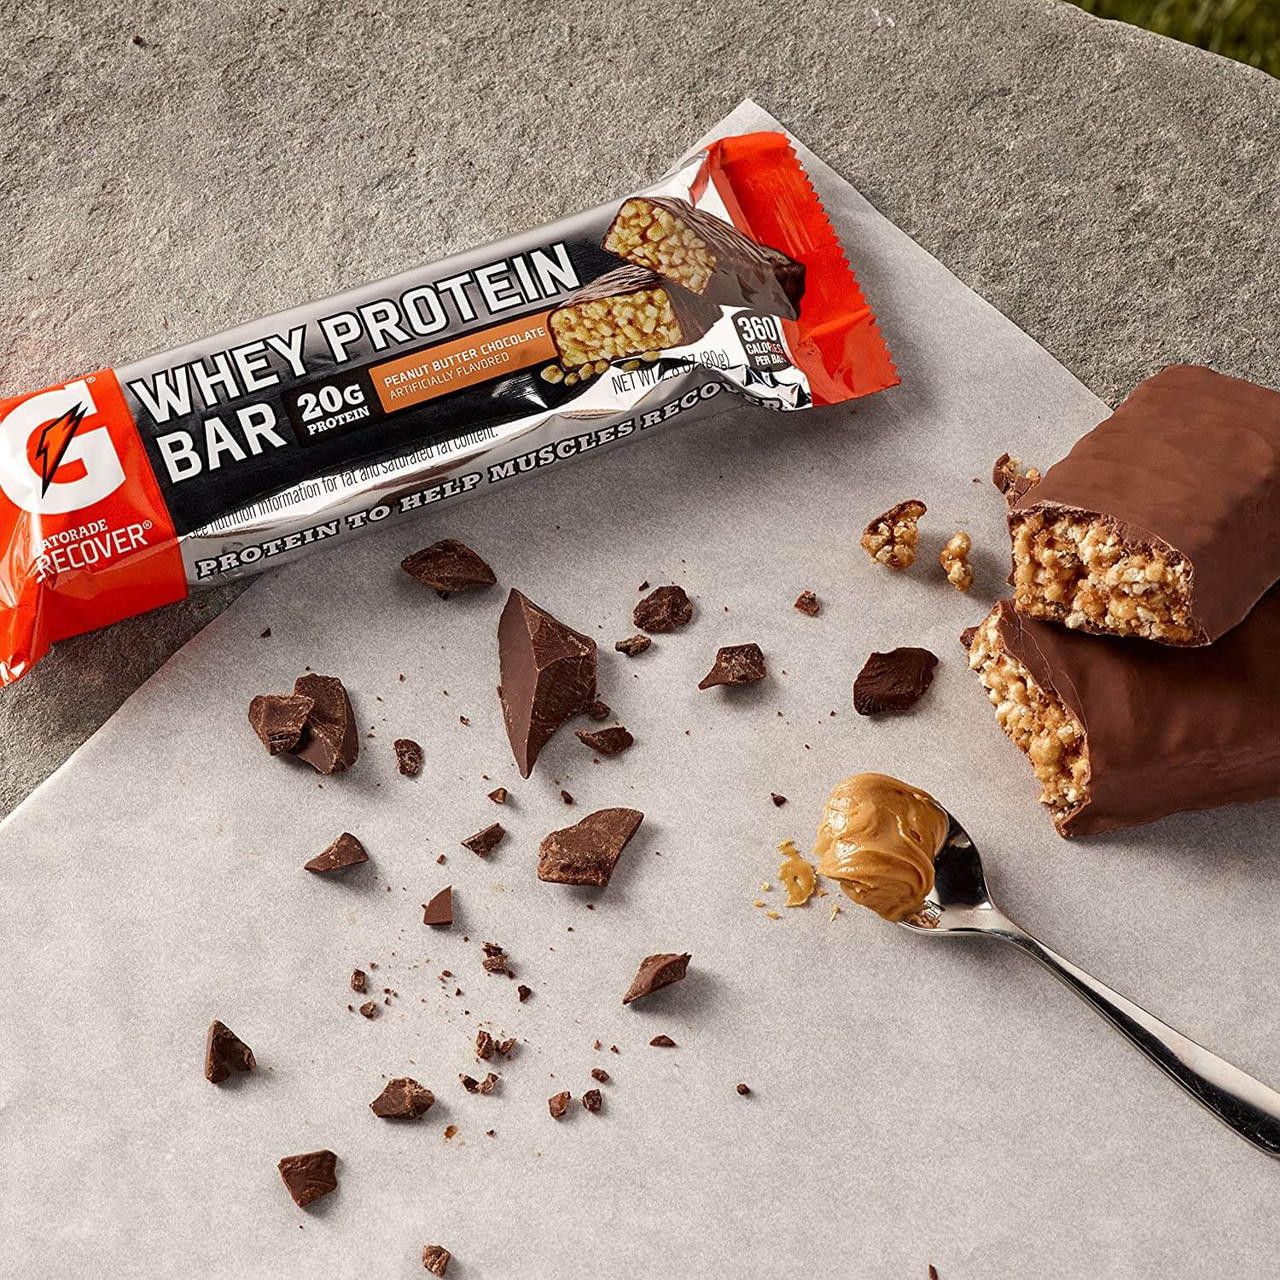 https://cdn11.bigcommerce.com/s-g5ygv2at8j/images/stencil/1280x1280/products/14321/29810/gatorade-gatorade-whey-protein-bar-or-peanut-butter-chocolate-flavor-or-12-x-80g-or-20g-protein-for-athletic-recovery__95330.1688348674.jpg?c=1